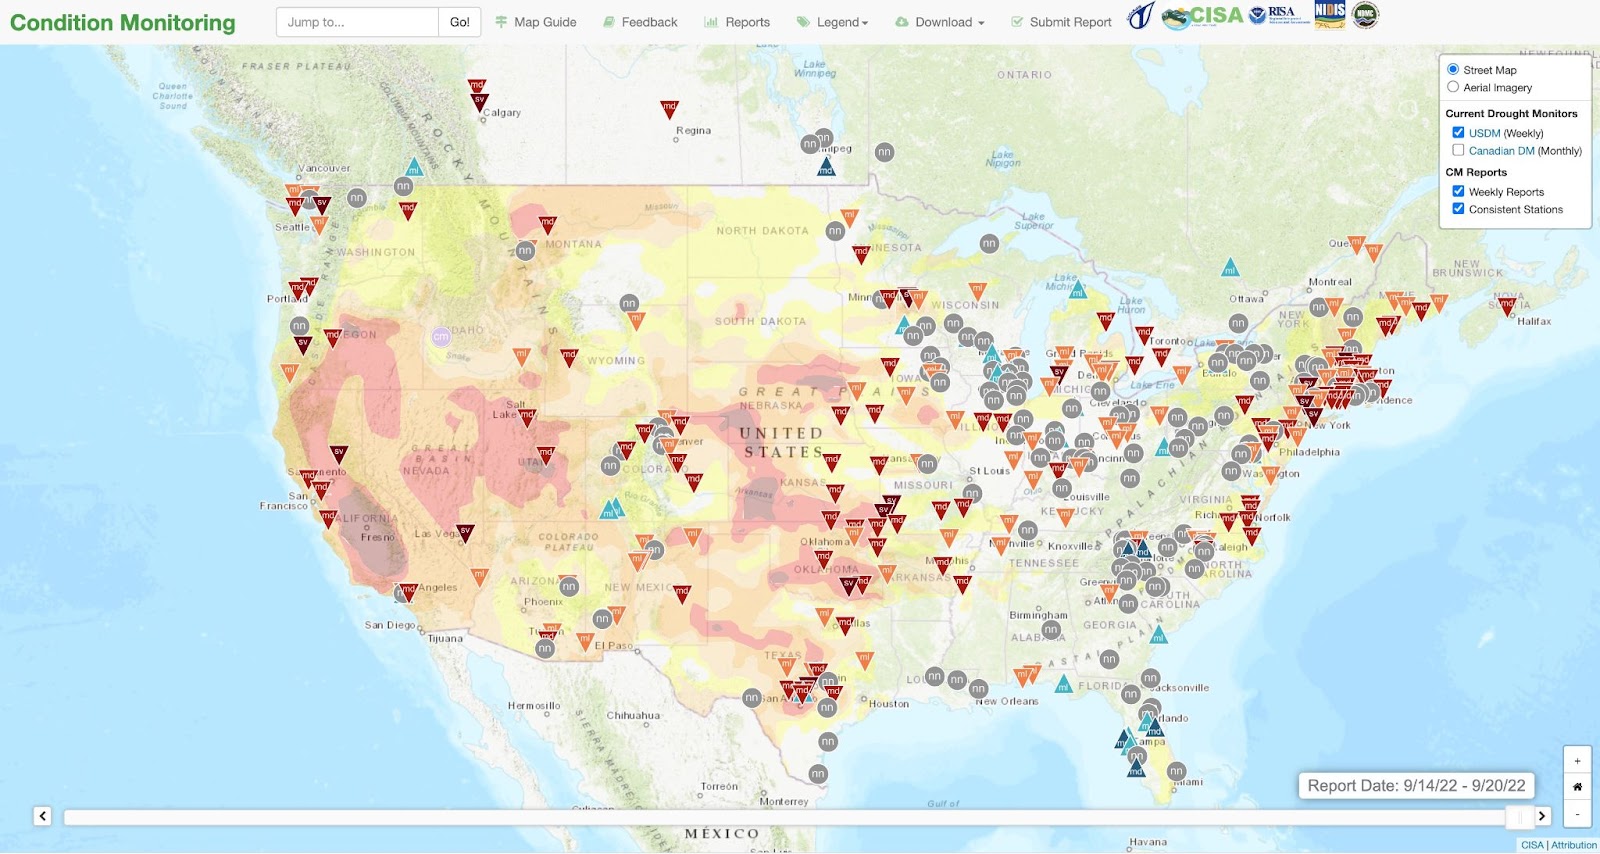 The interactive Condition Monitoring web map makes CoCoRaHS reports more accessible.